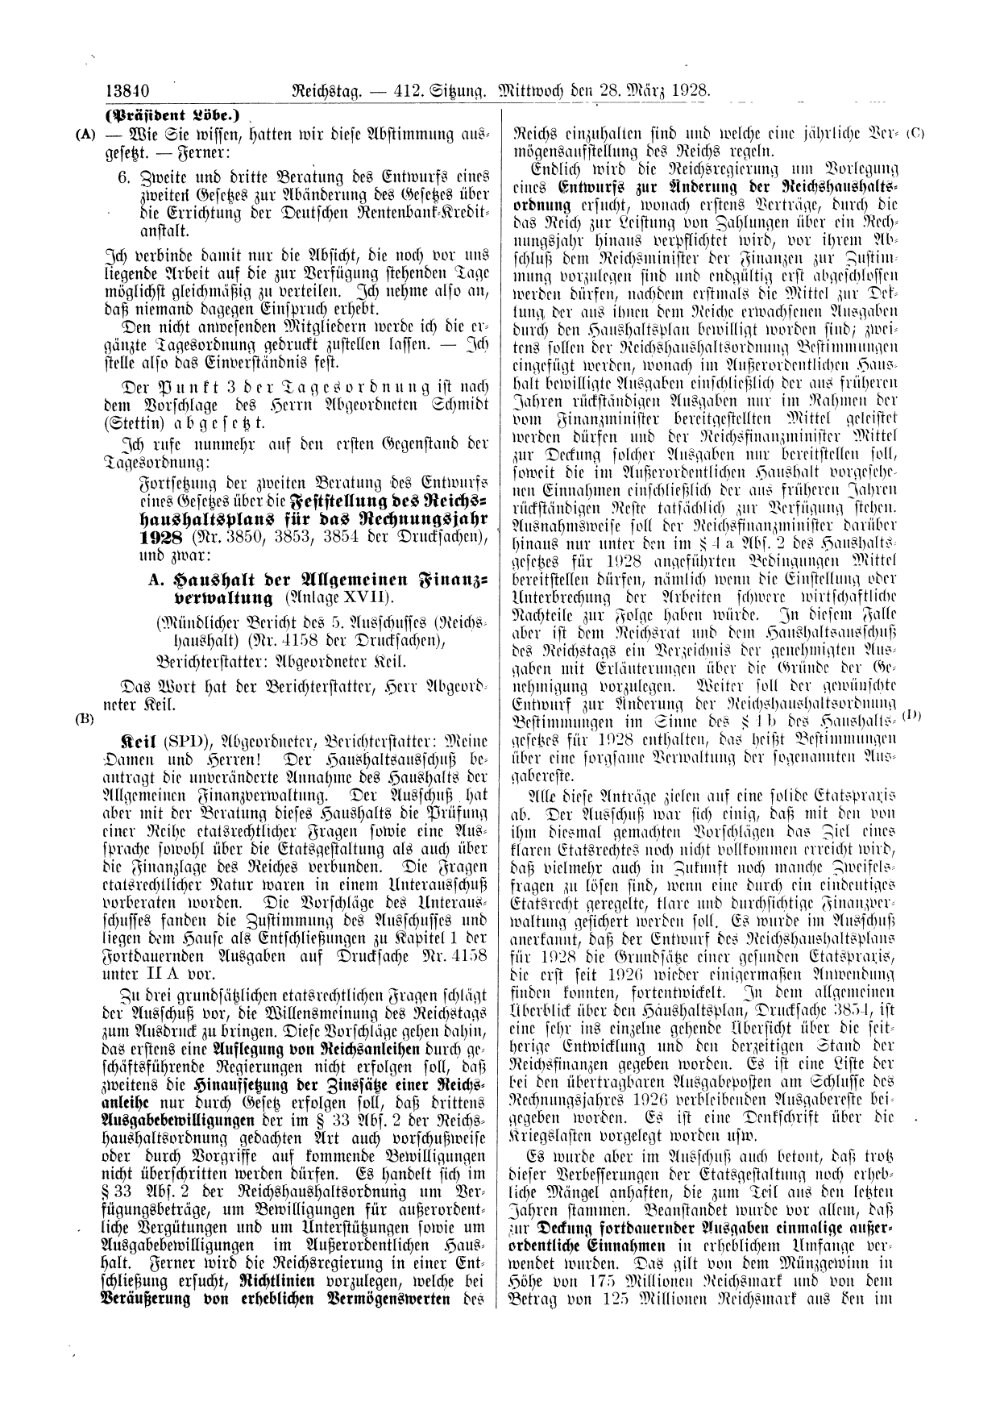 Scan of page 13840